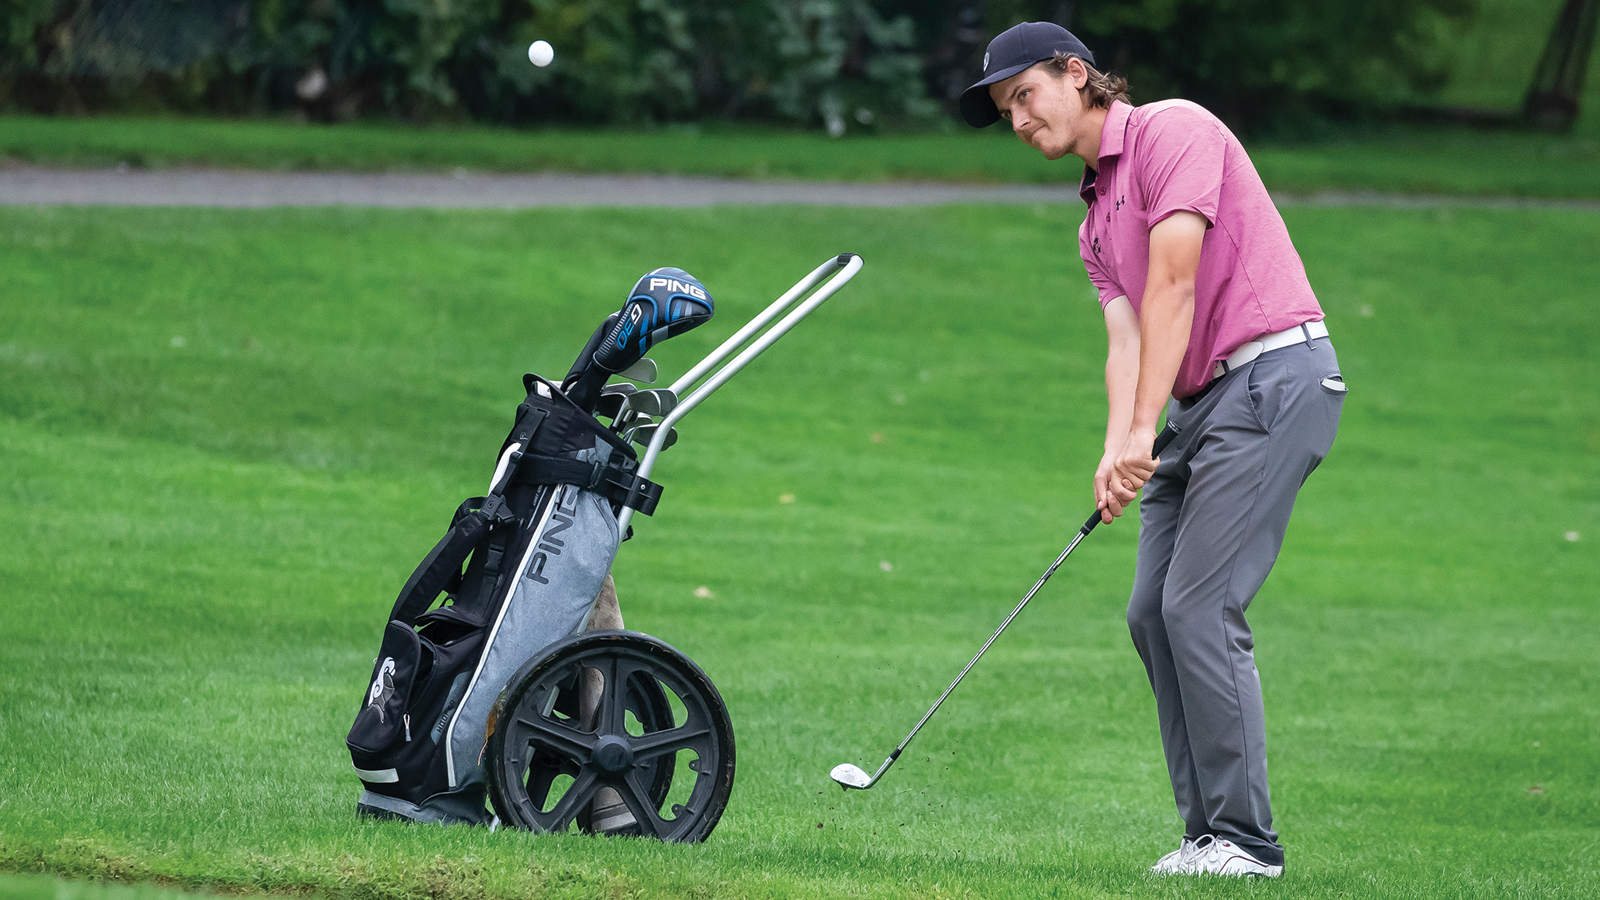 Banner Season: Gee-Gees early leaders at OUA golf regional qualifier in Oshawa